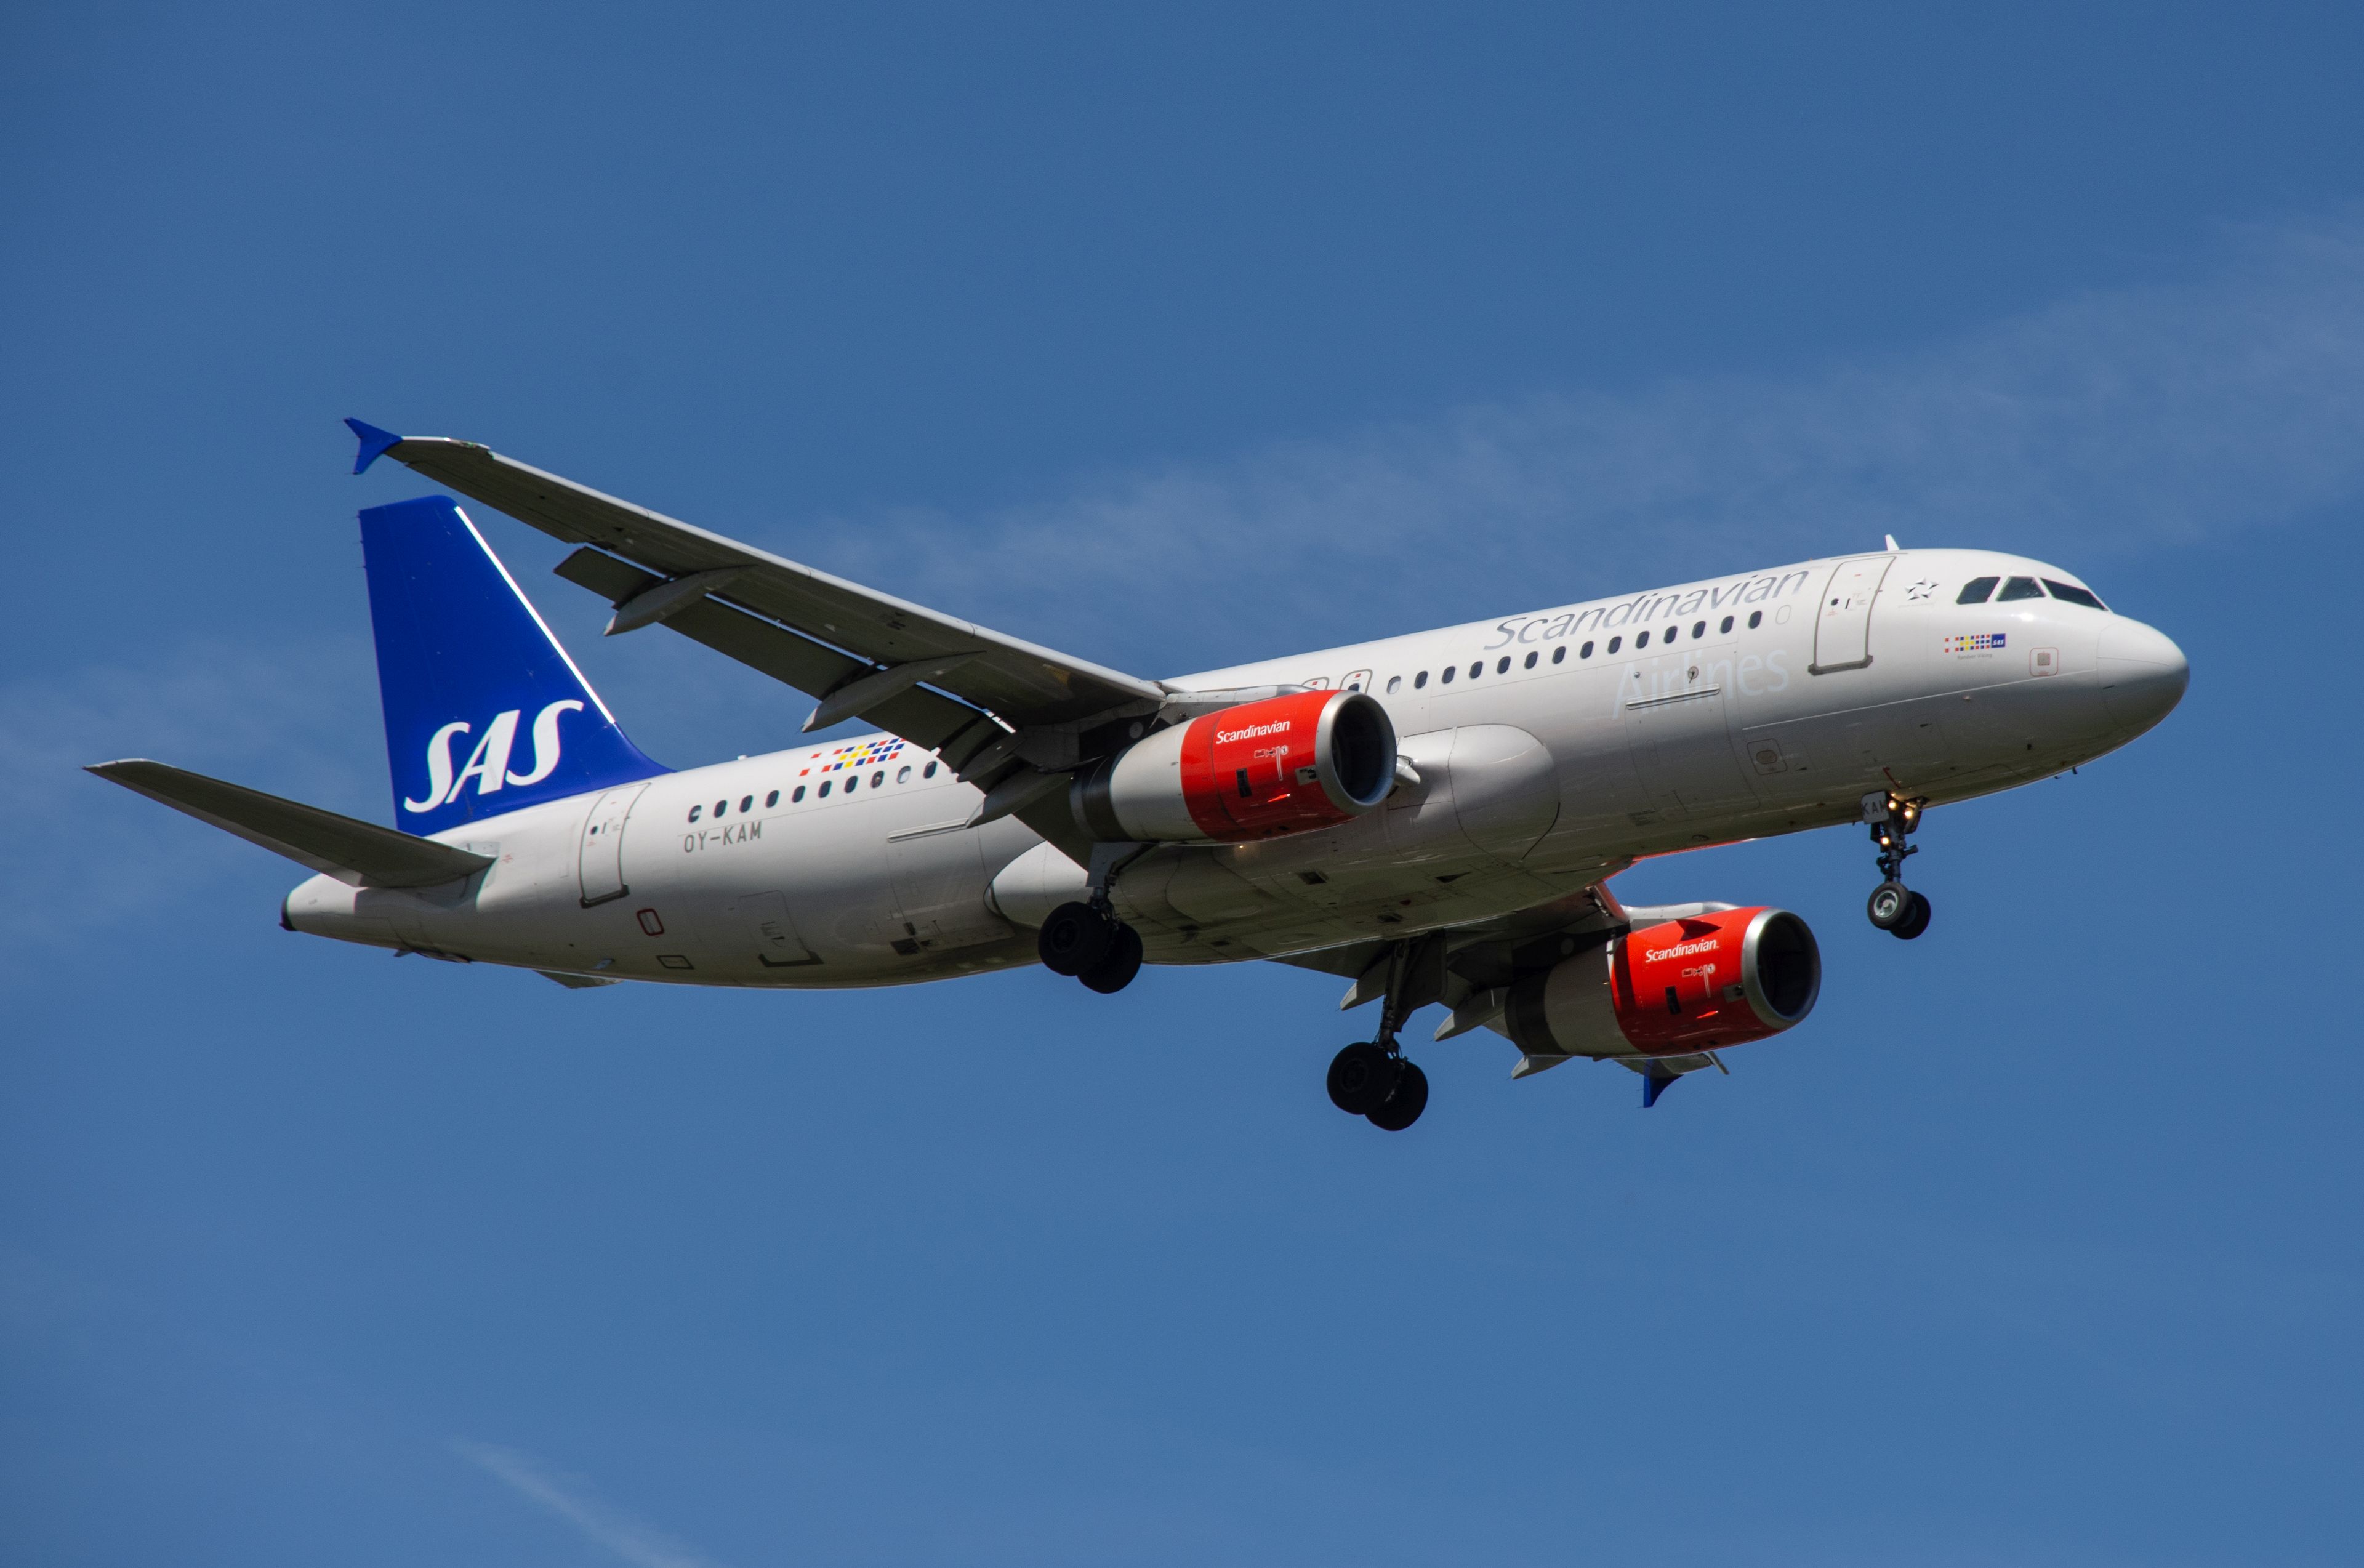 OY-KAM/OYKAM SAS Scandinavian Airlines Airbus A320 Airframe Information - AVSpotters.com